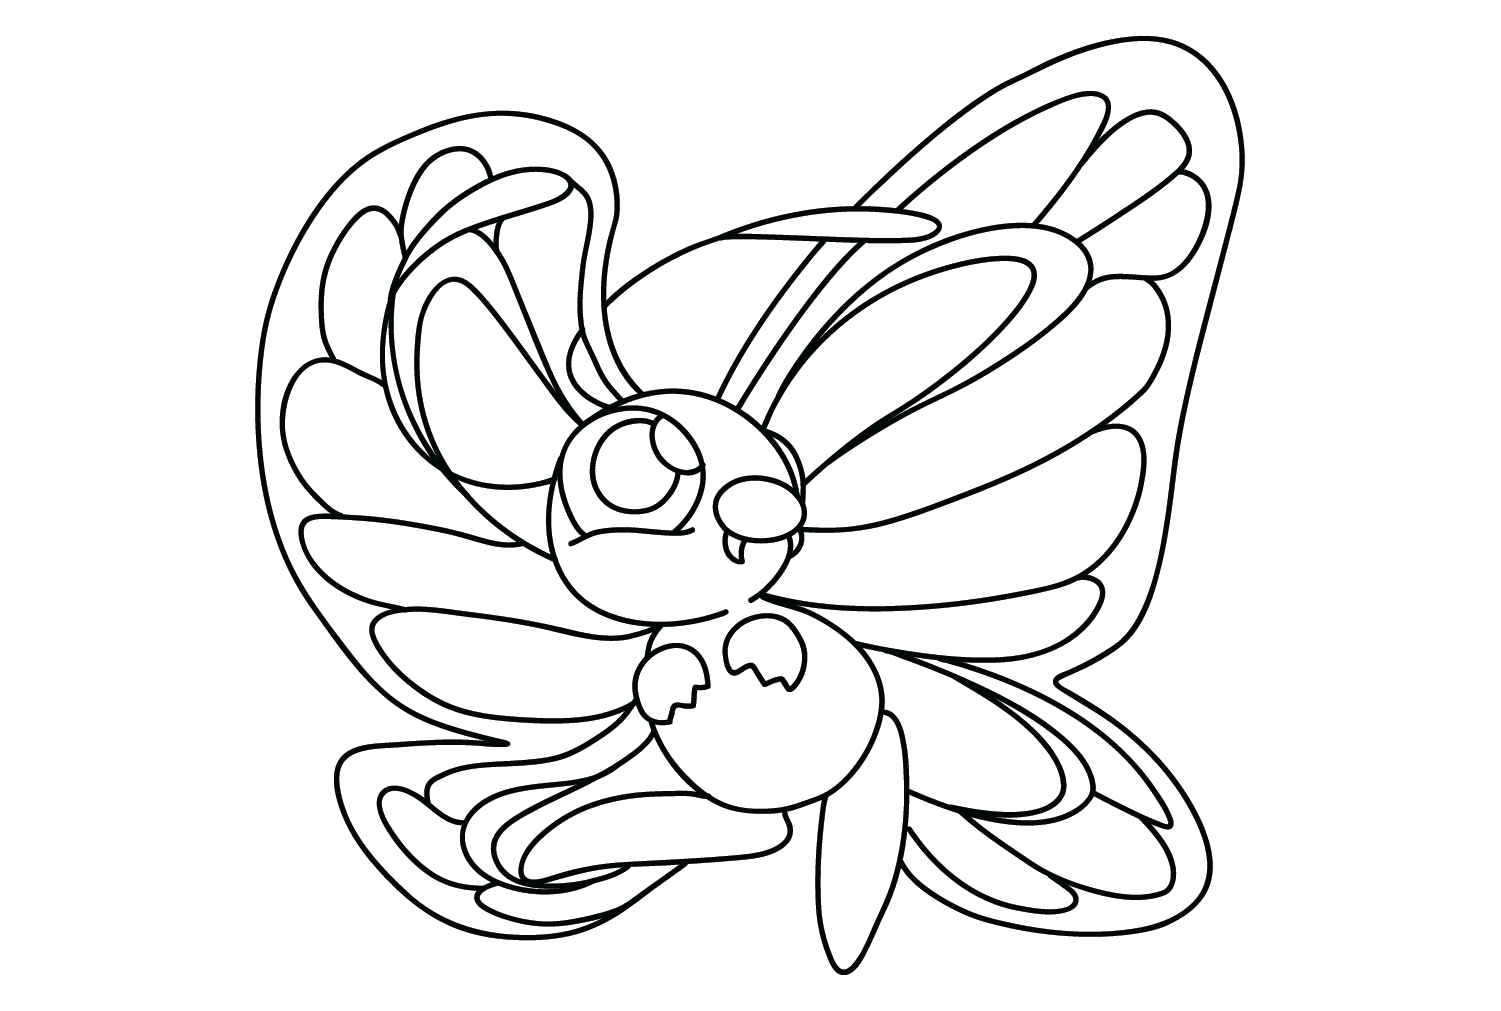 Butterfree Coloring Sheet from Butterfree